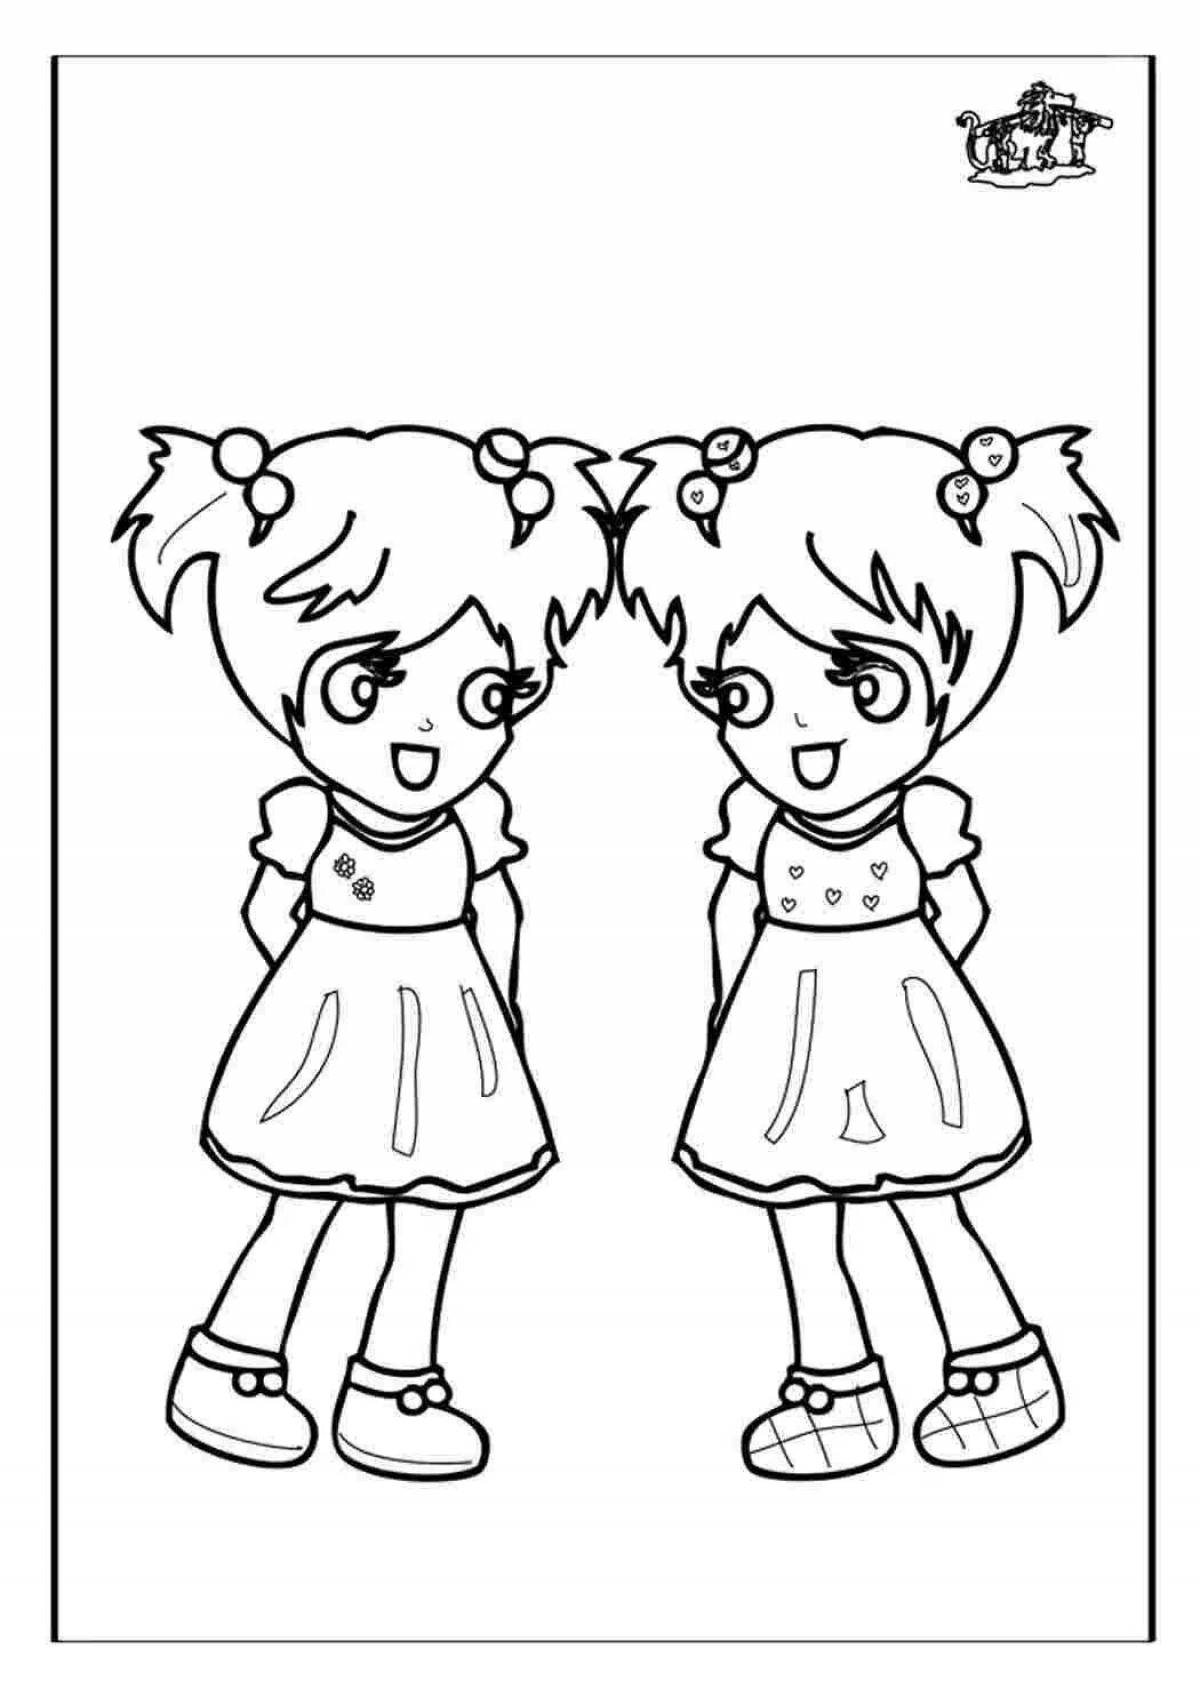 Twins shining coloring pages